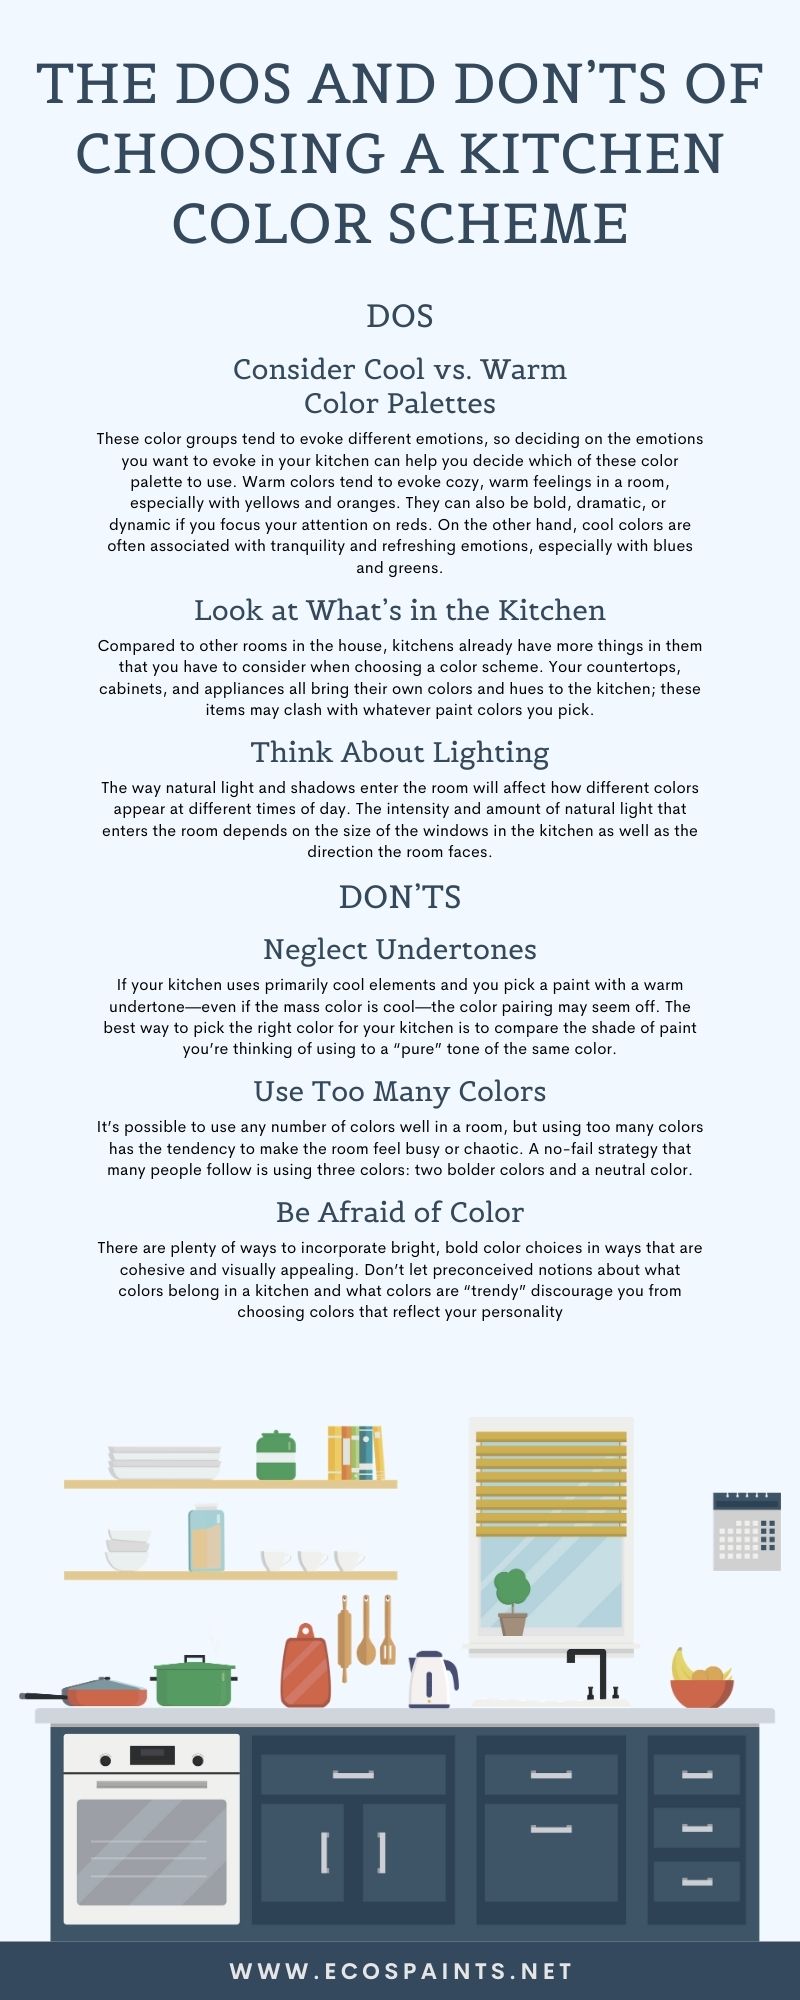 The Dos and Don'ts of Choosing a Kitchen Color Scheme